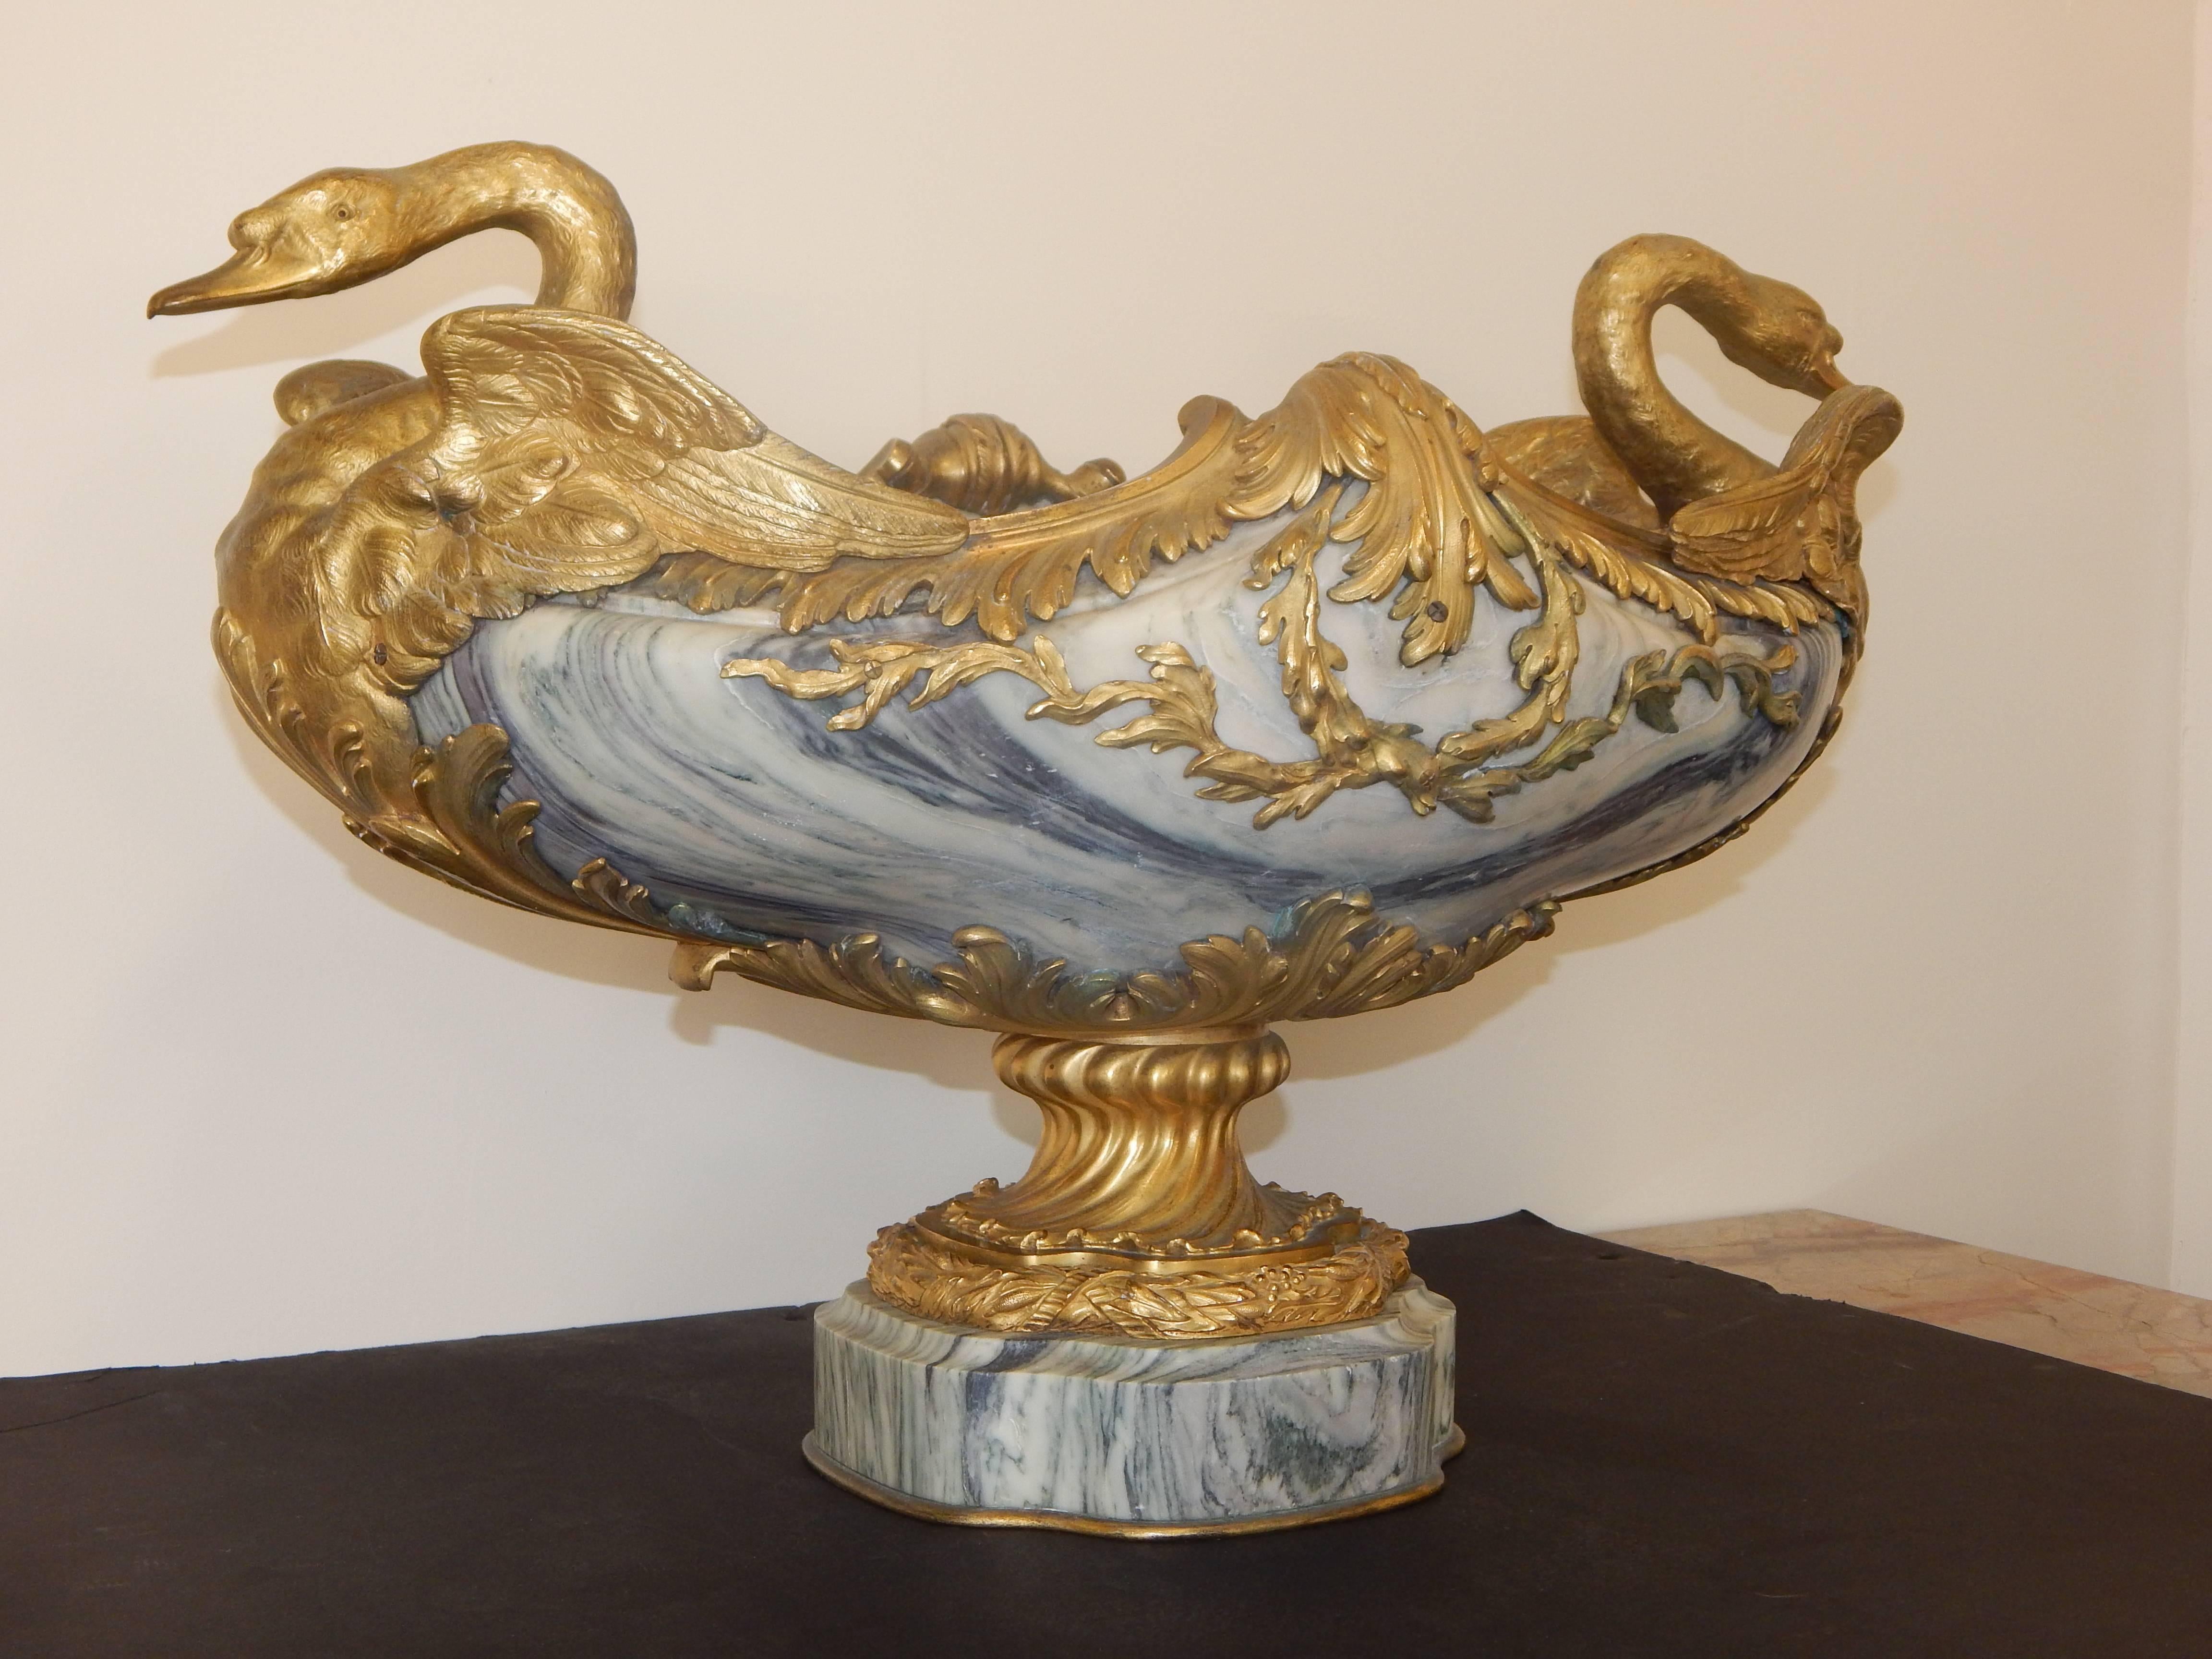 Exquisite Bronze Mounted Marble Centerpiece with Swans For Sale 3